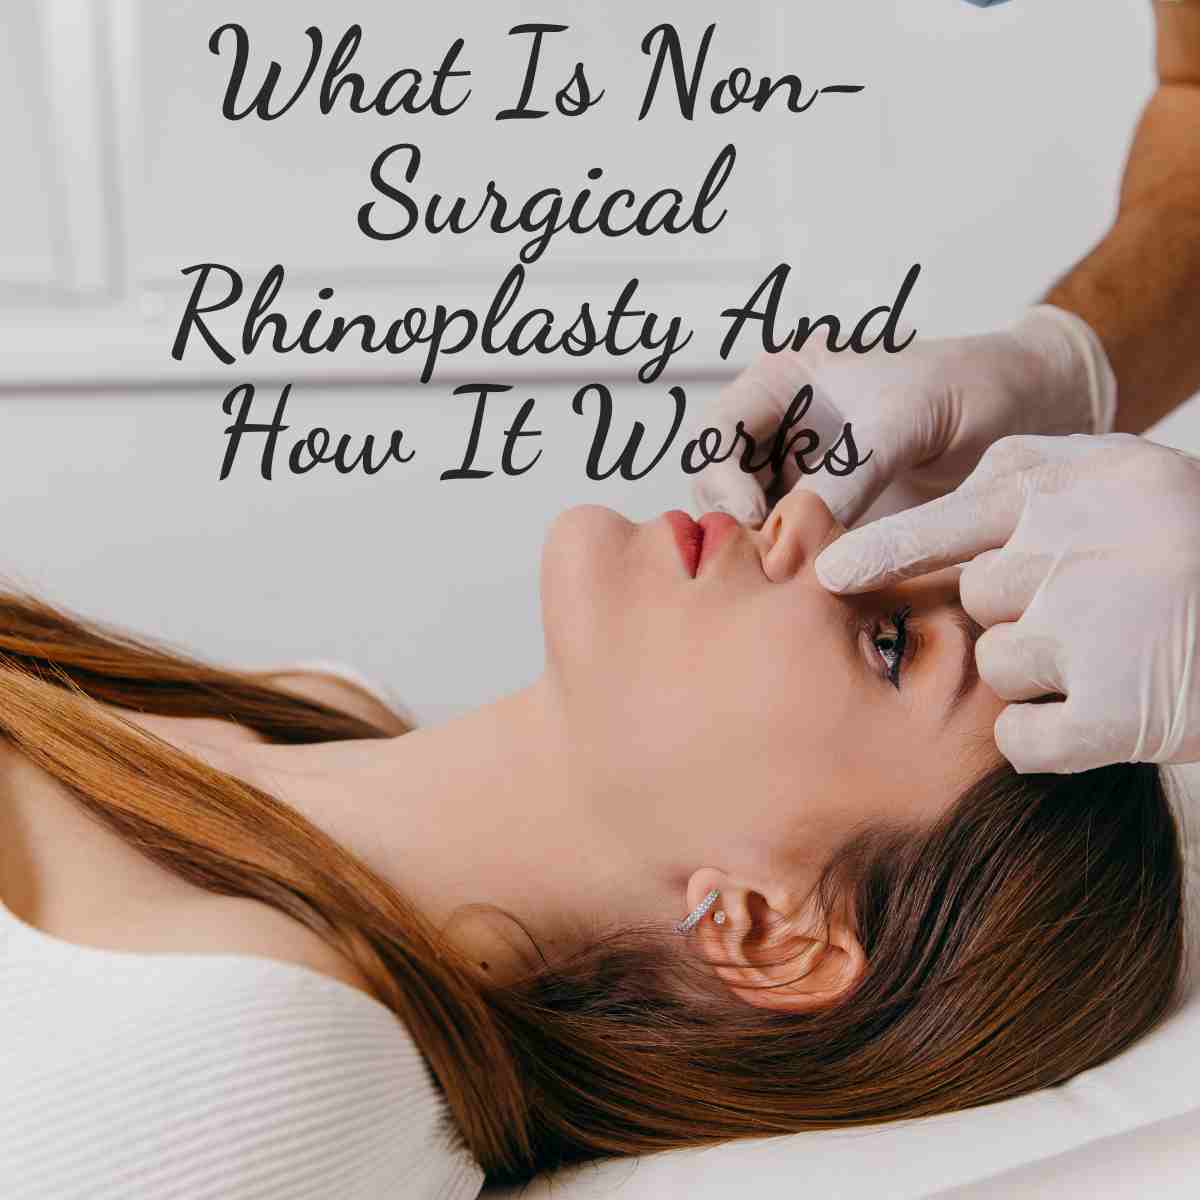 What Is Non-Surgical Rhinoplasty And How It Works